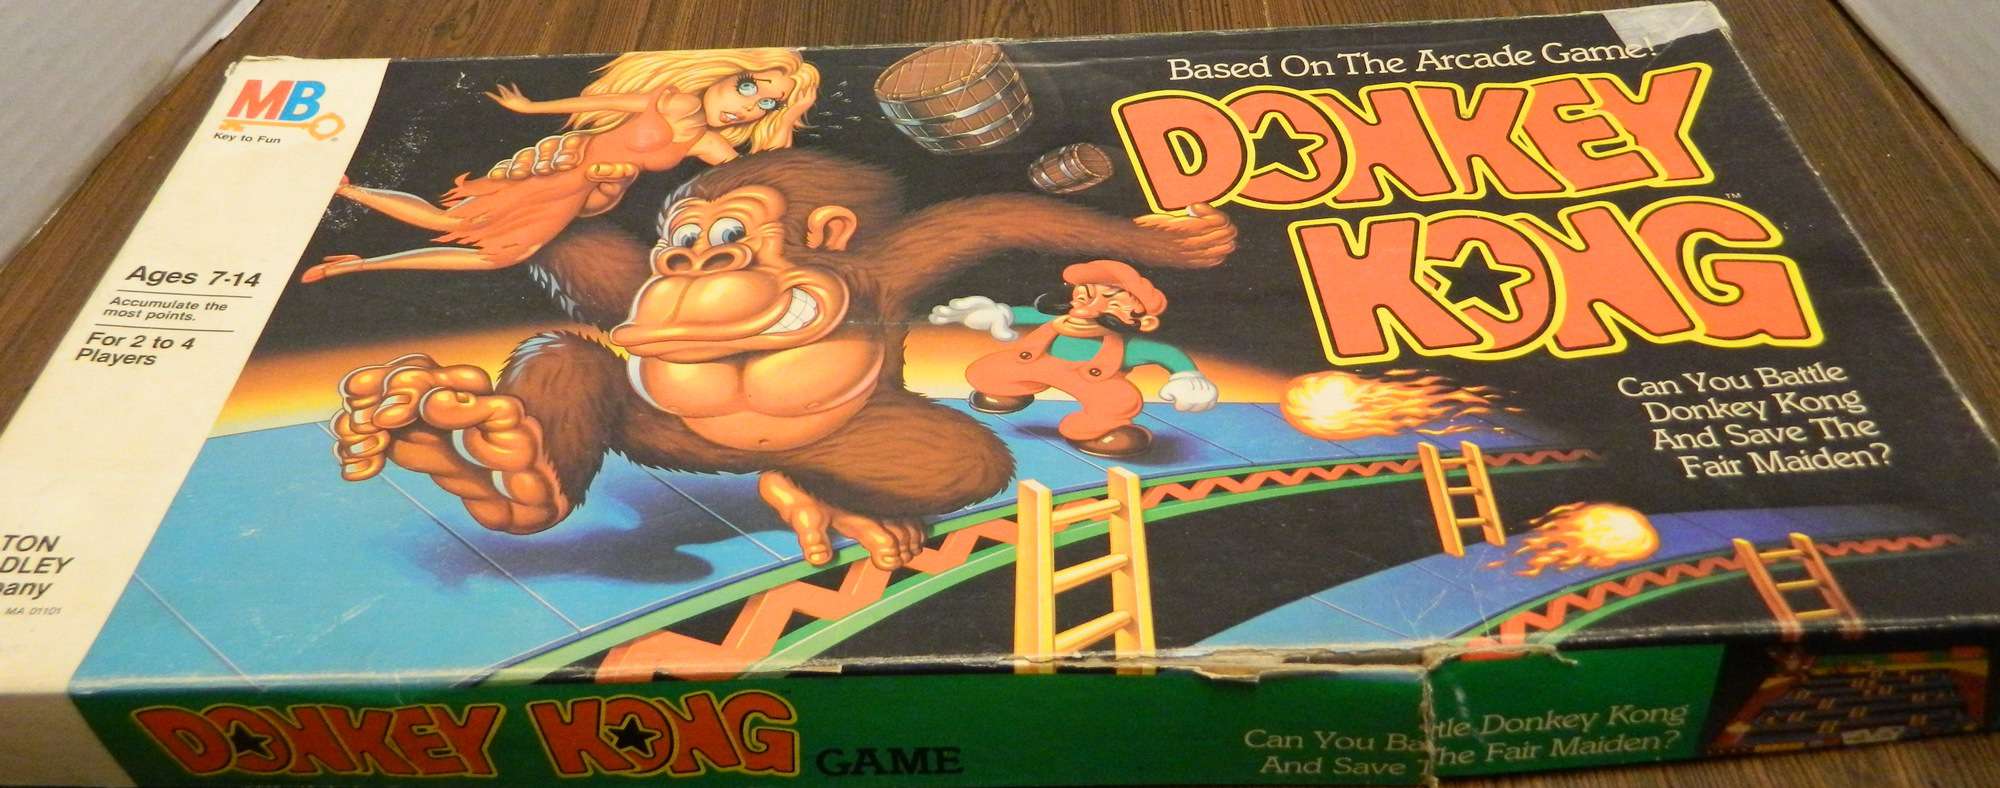 Donkey Kong Board Game Review and Instructions